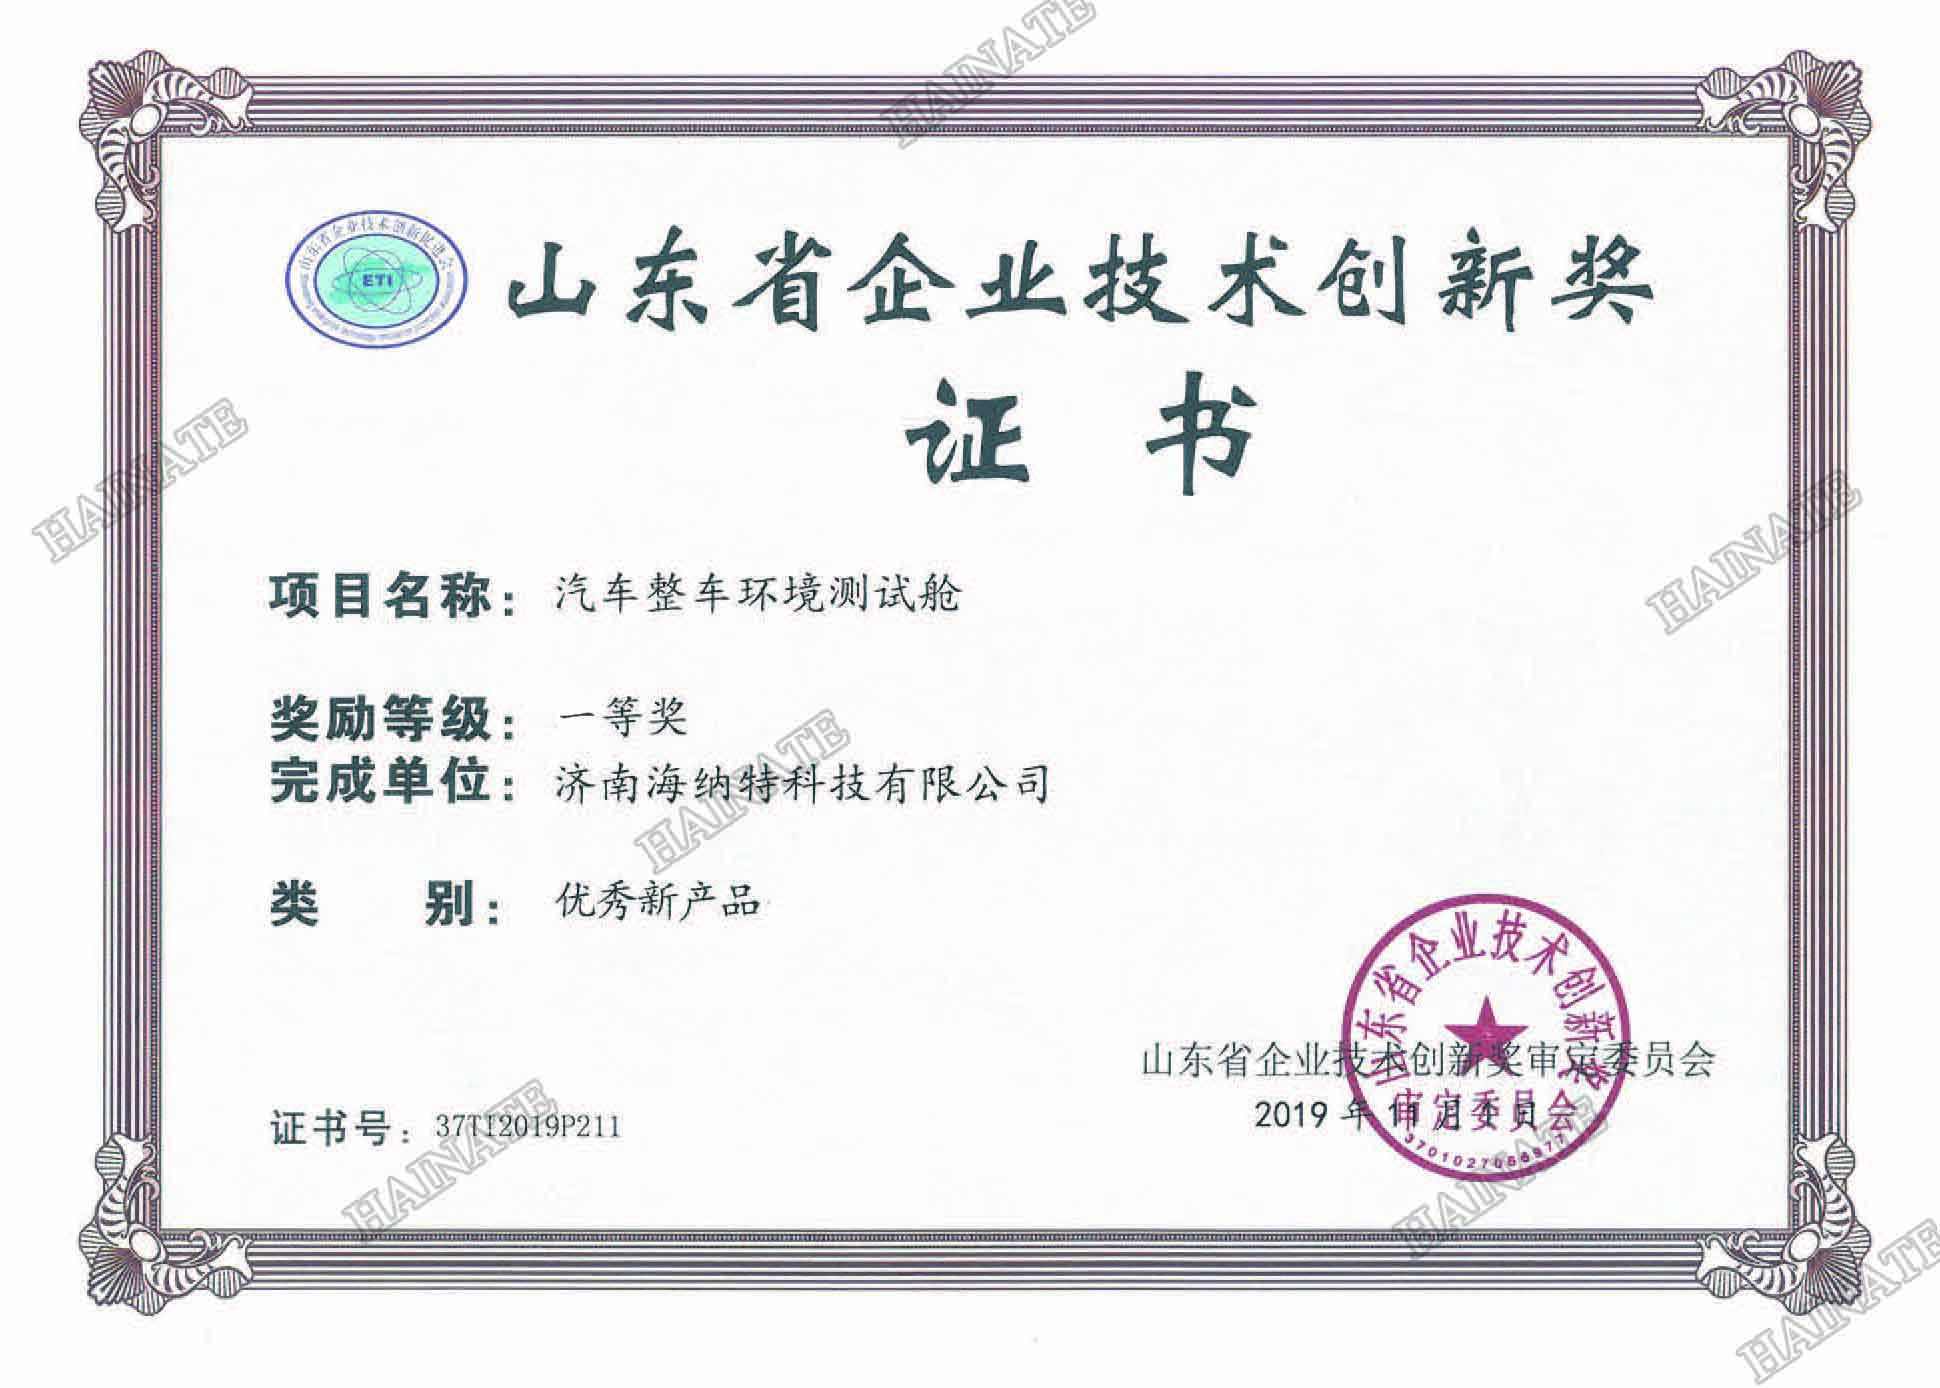 Congratulations to our company for winning the &quot;Shandong Enterprise Technology Innovation Award&quot;